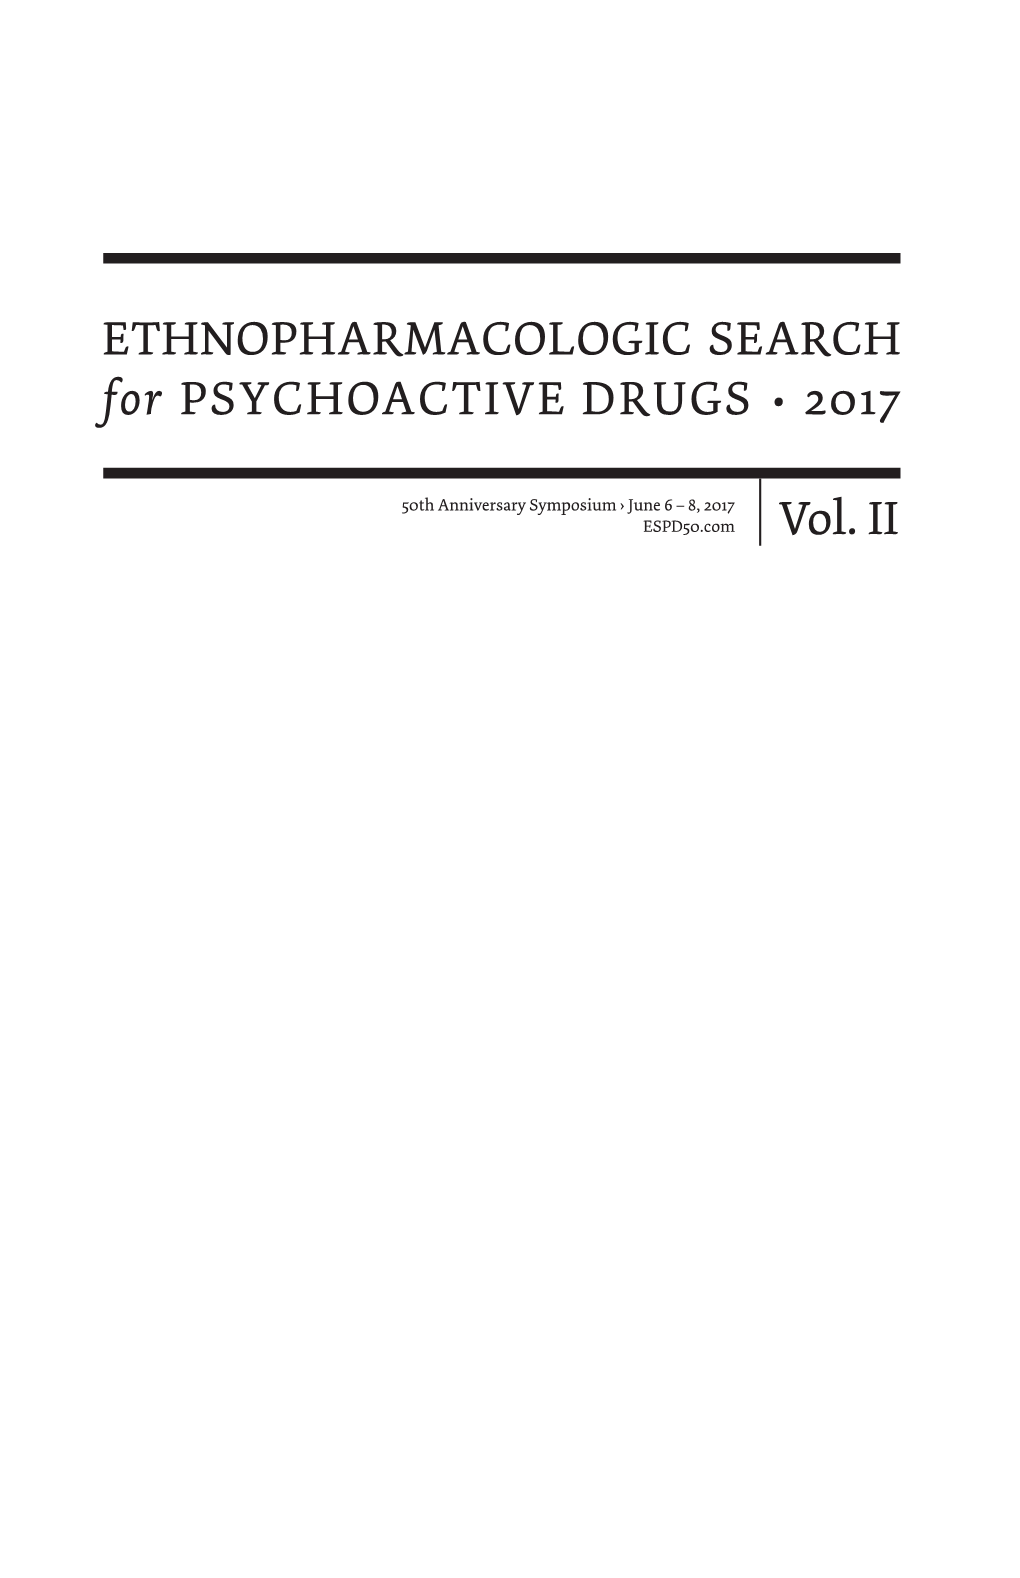 Vol. II ETHNOPHARMACOLOGIC SEARCH for PSYCHOACTIVE